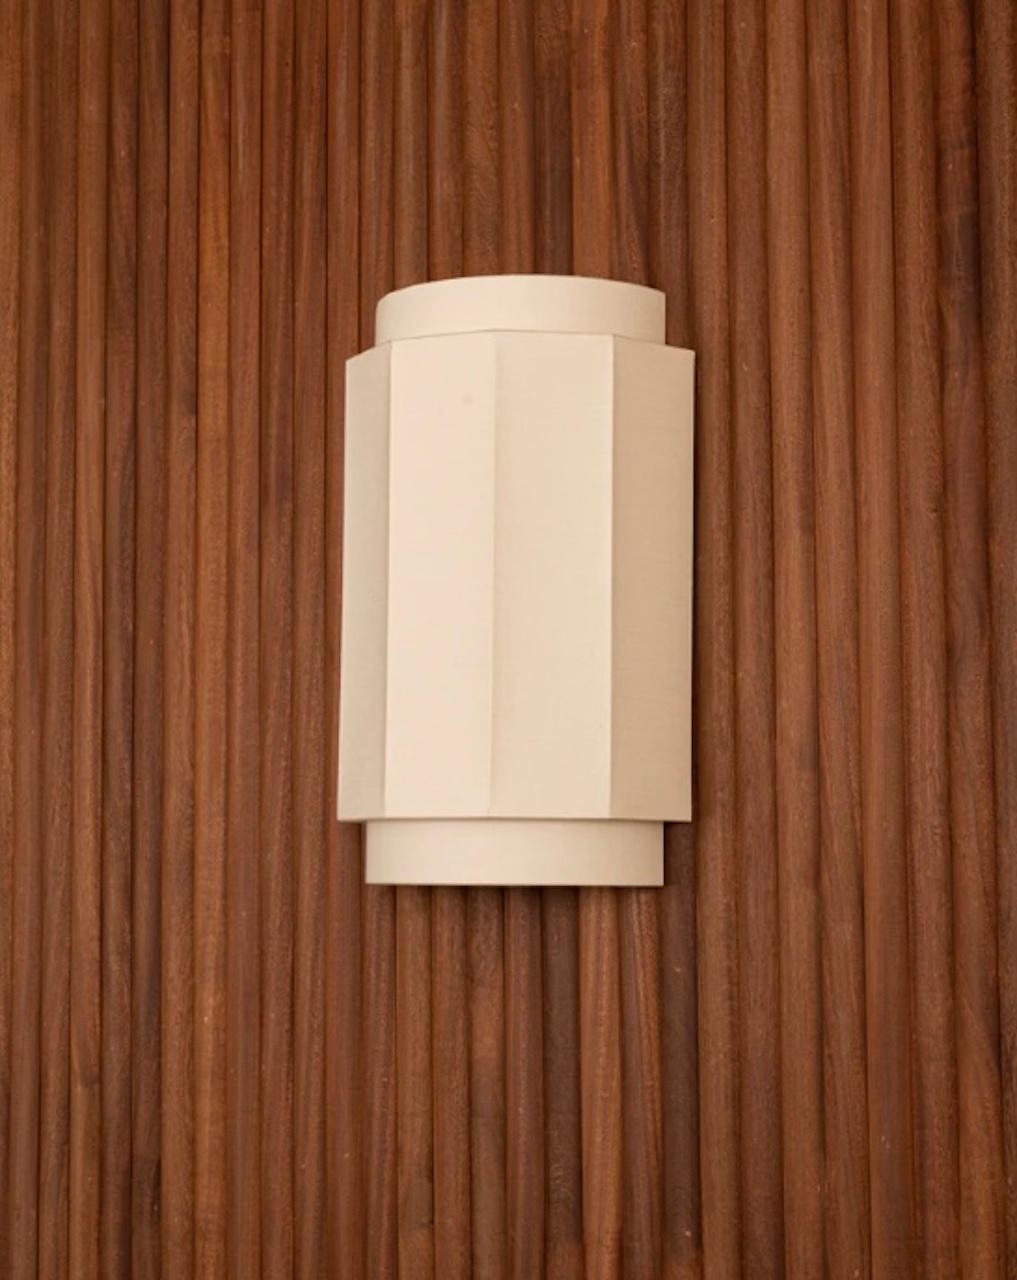 Handmade linen wall sconce with a layered shade. Made in Spain. 